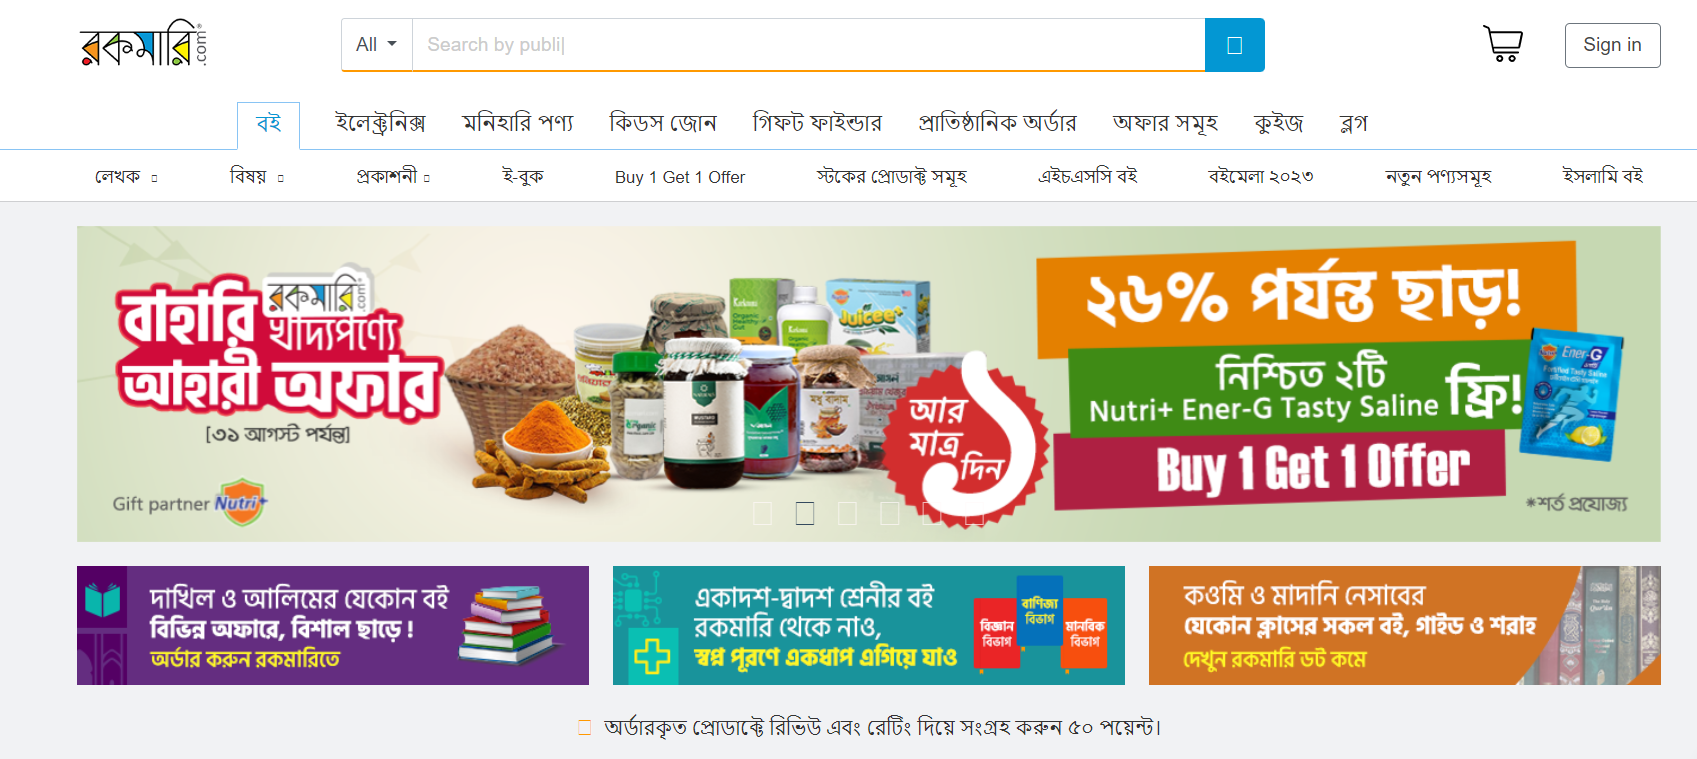 Rokomari.com is one of the most reputable eCommerce sites in Bangladesh